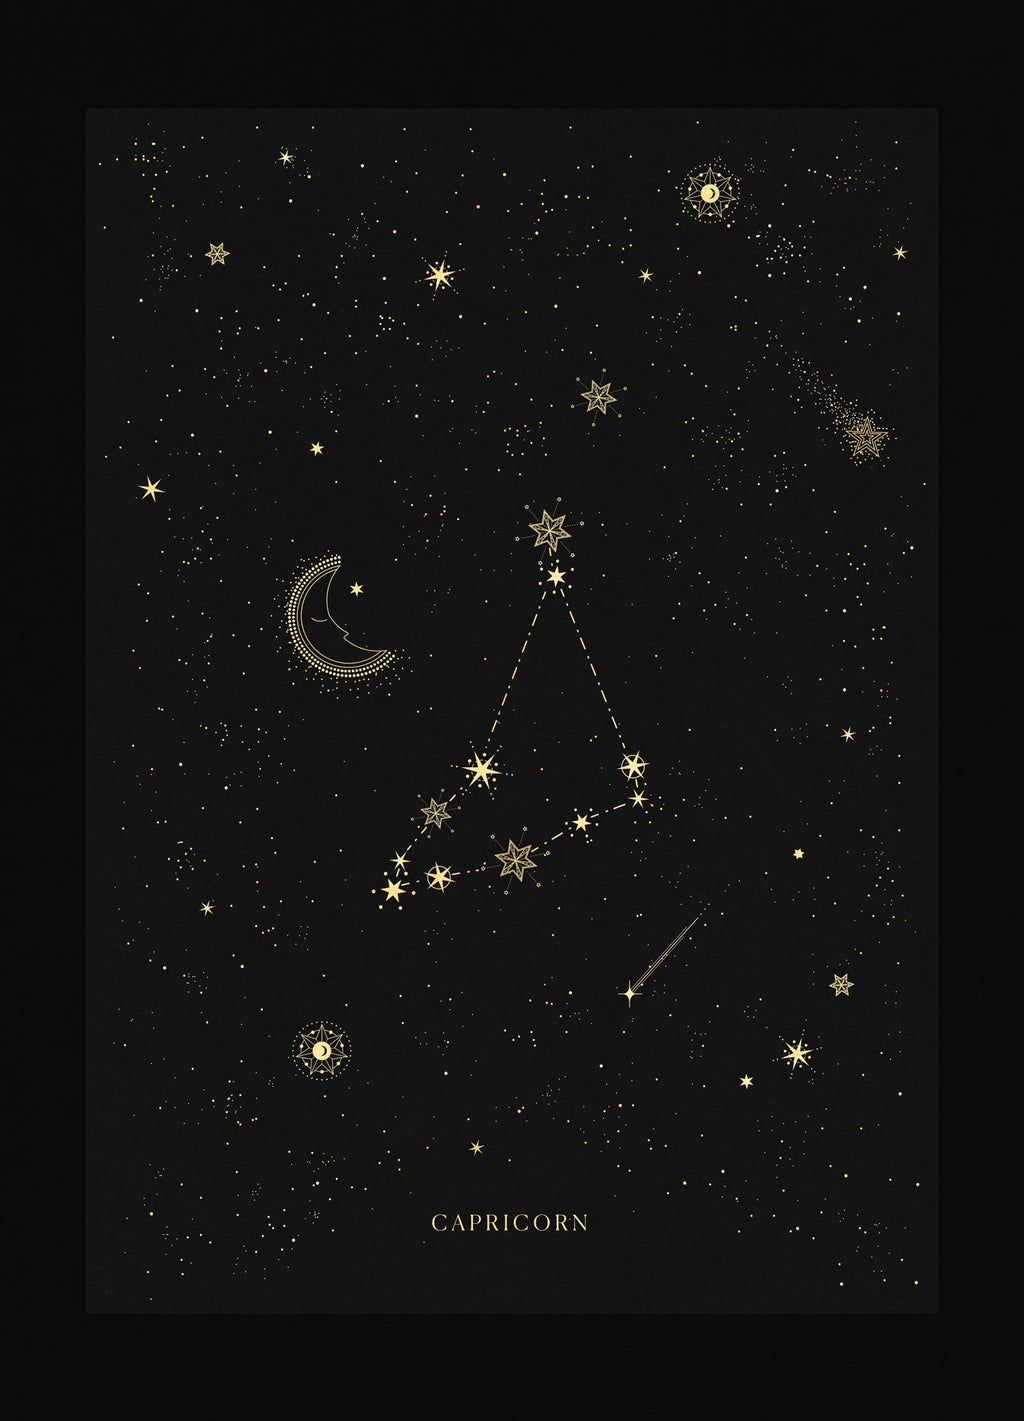 Cancer Constellation Wallpapers